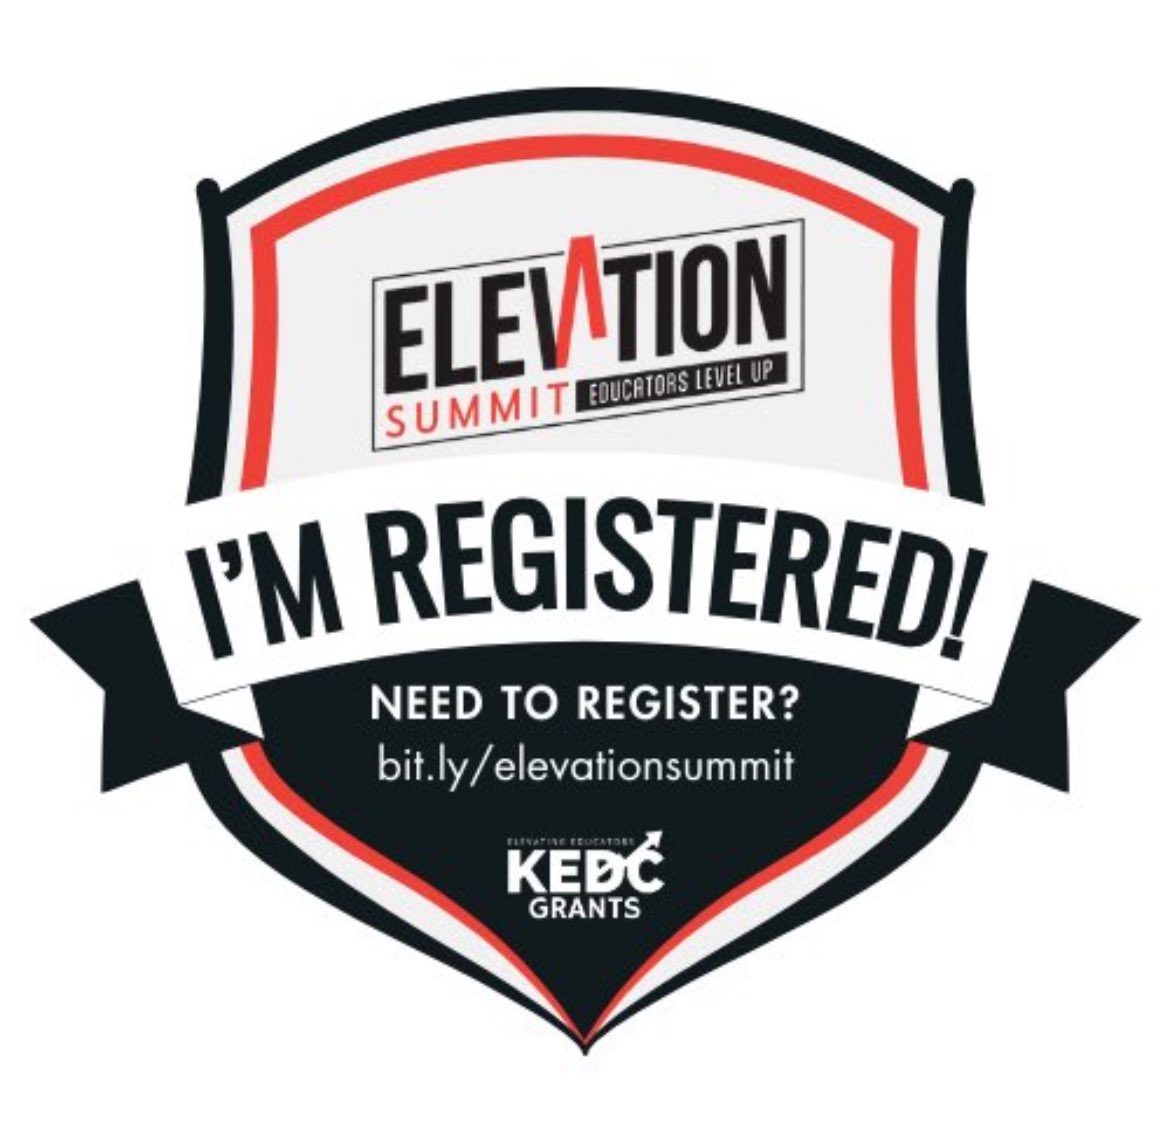 #ReadytoLearn 
I’m registered and ready for the Elevation Summit this summer!!! @KyCharge @KEDCGrants @KingWendy_m @DrJWEvansJr